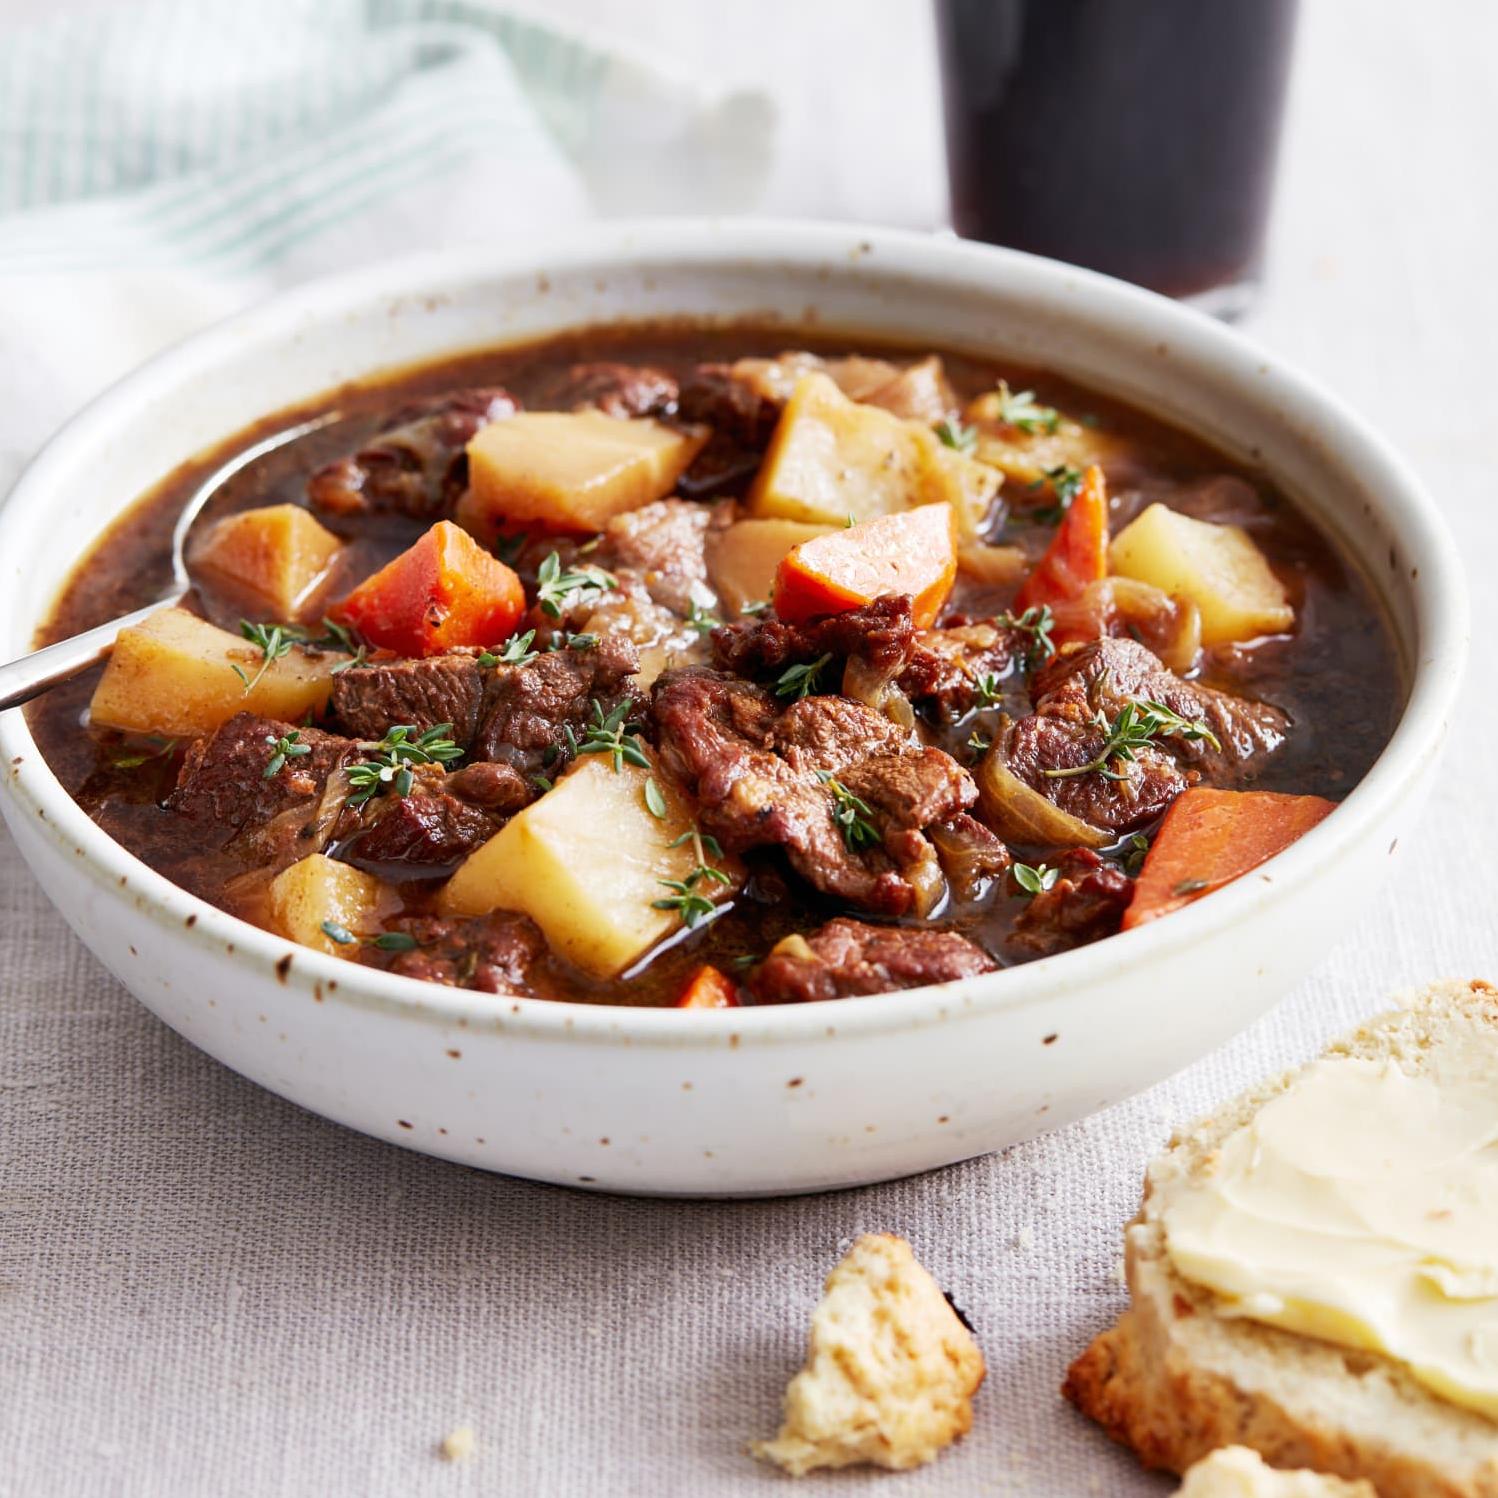  A classic Irish dish that warms the soul.